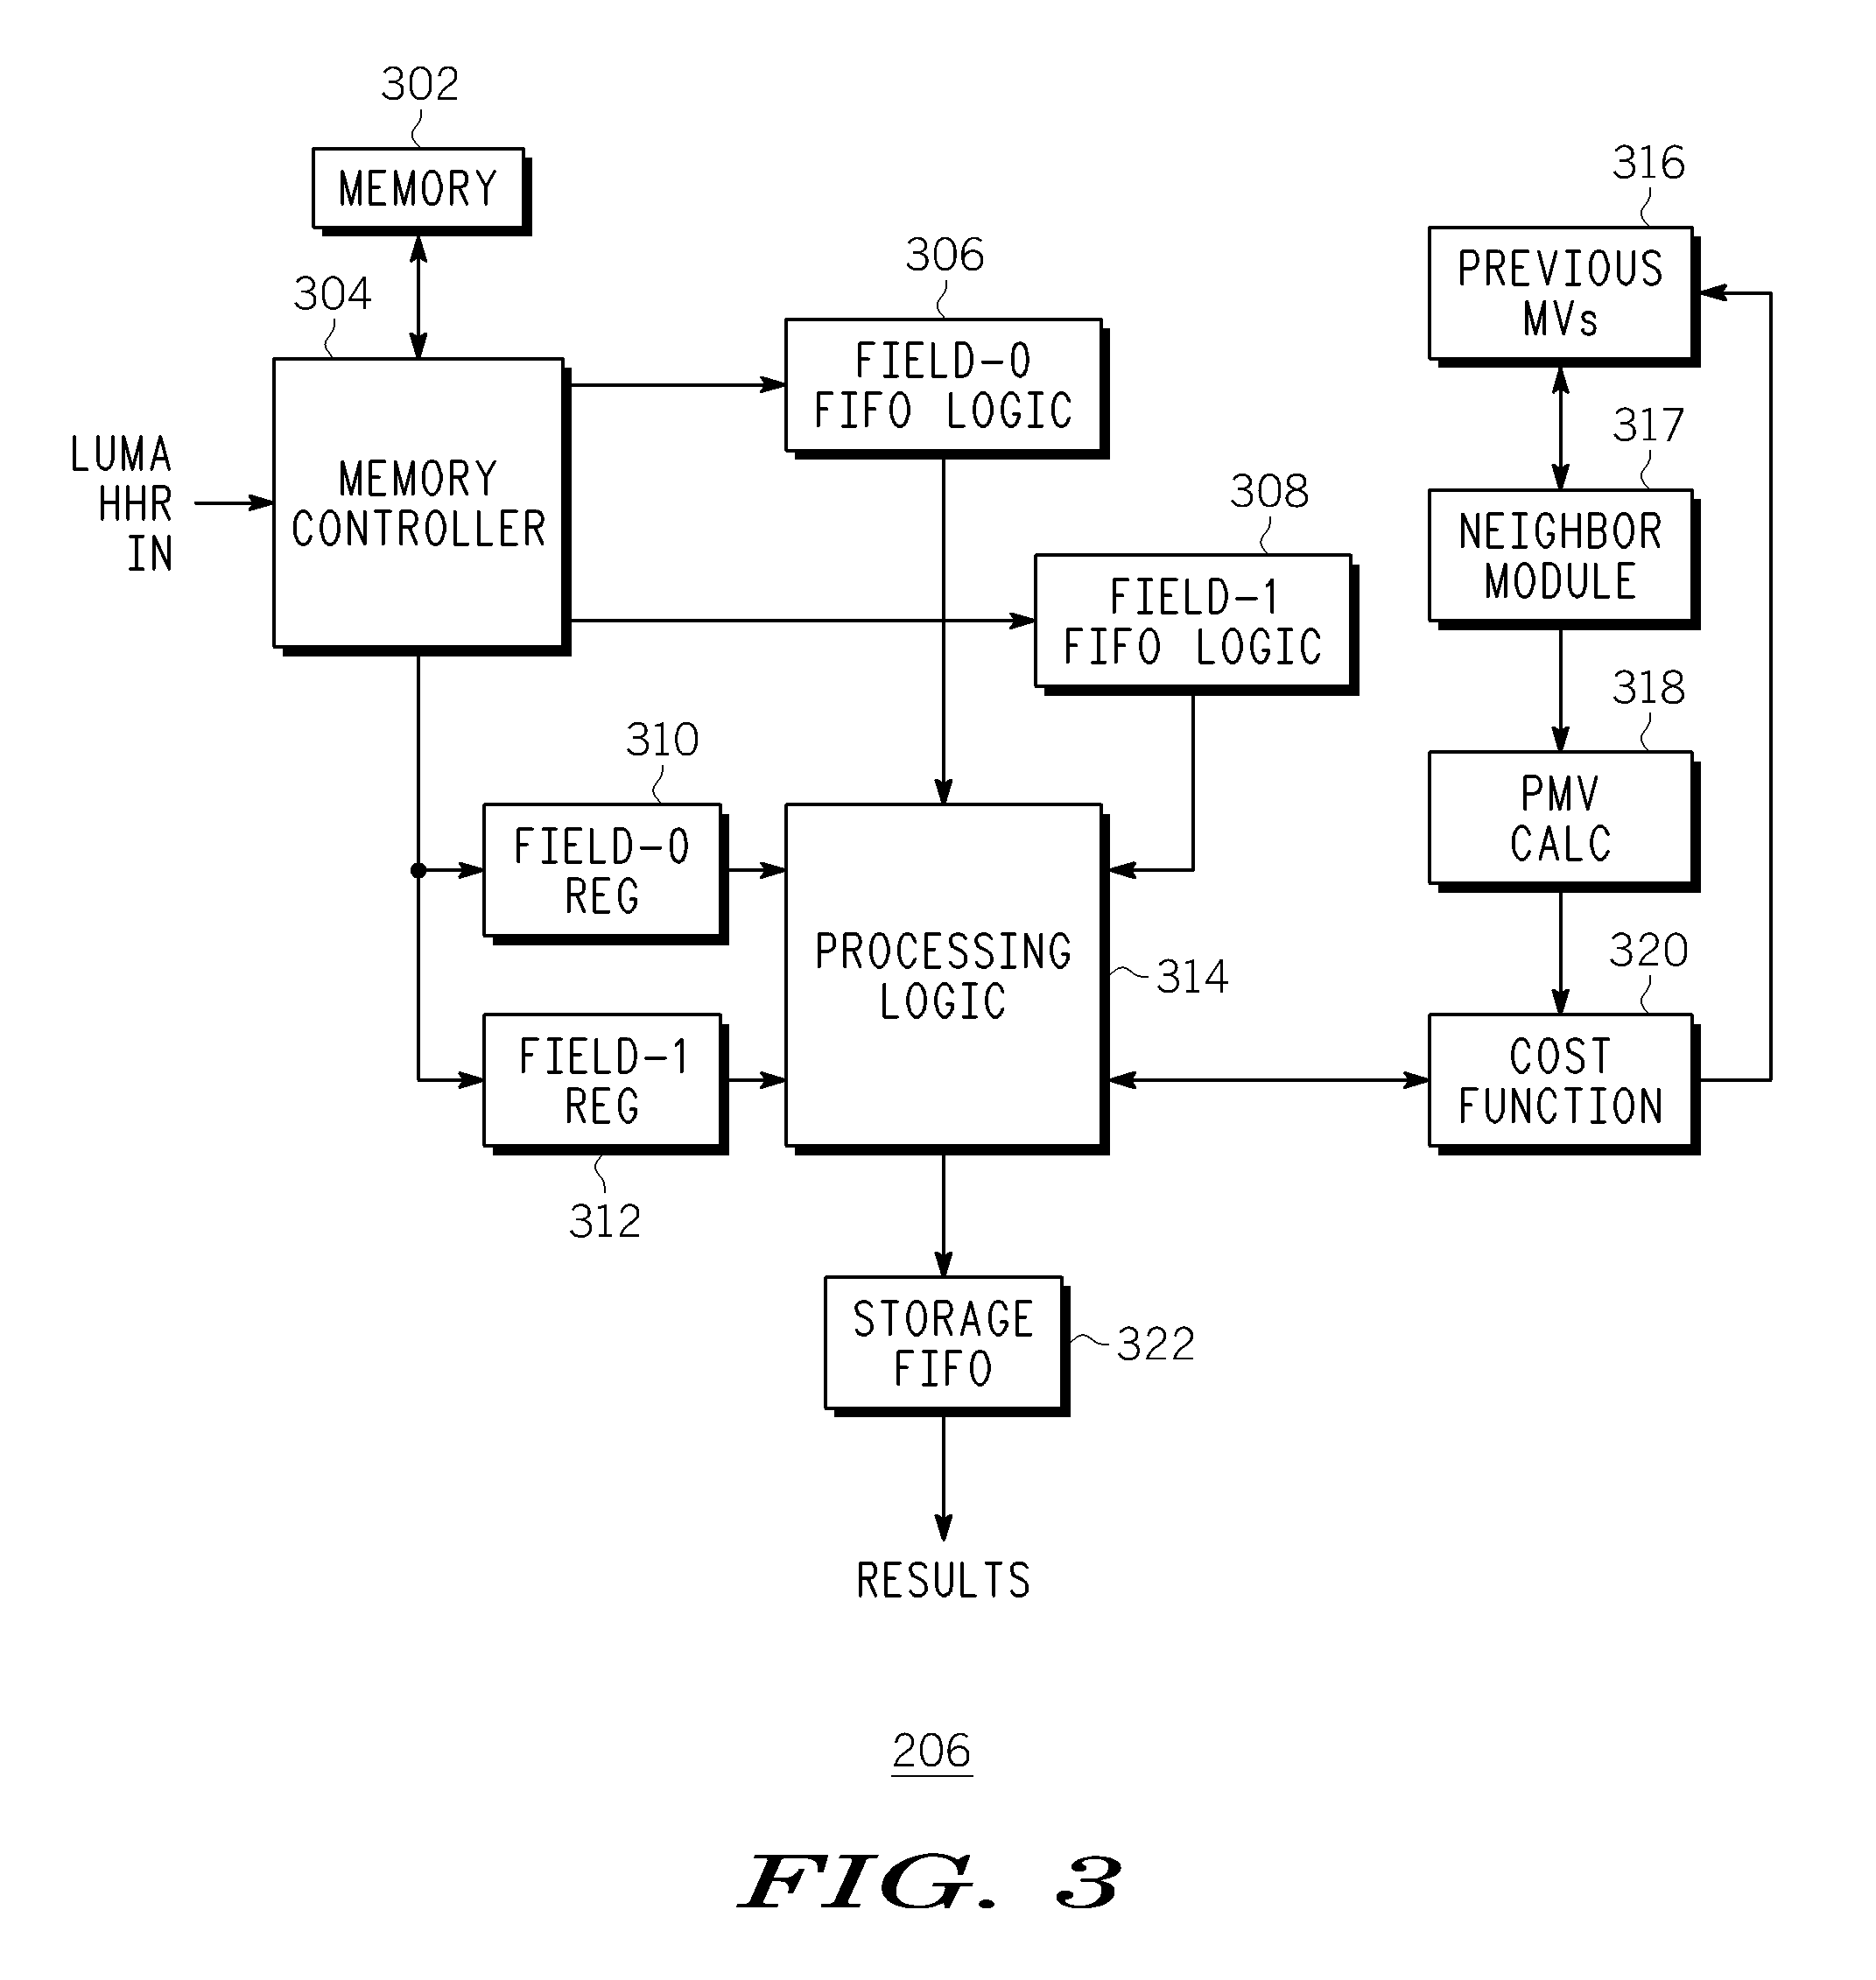 Method and Apparatus for Motion Estimation in a Video Encoder